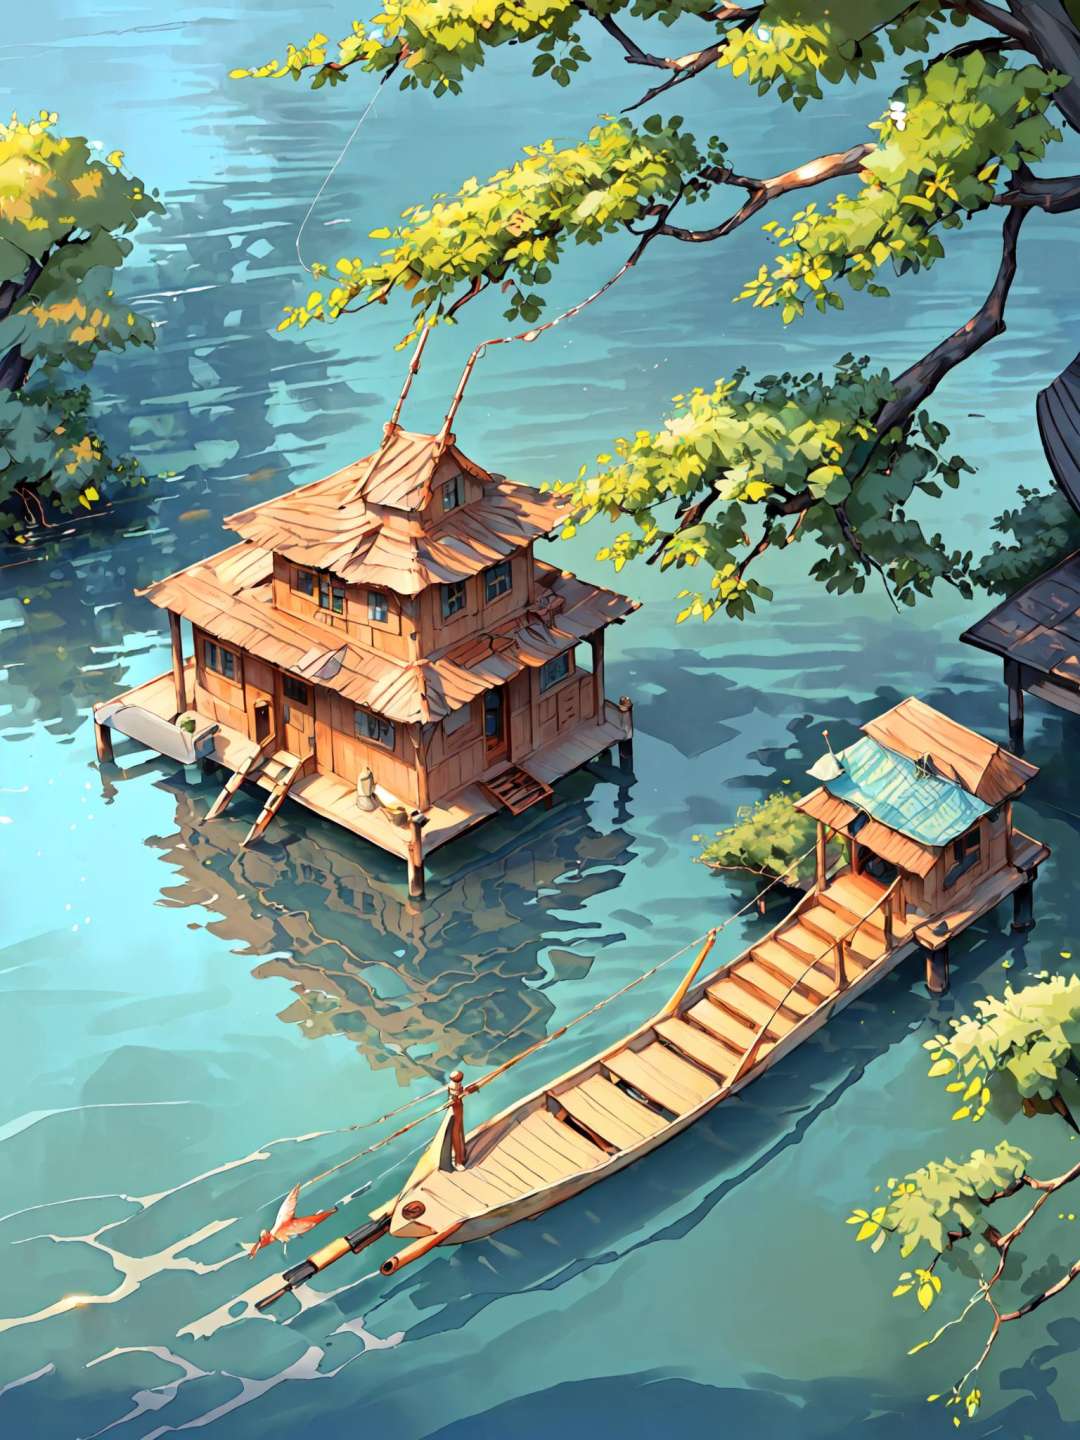 ((((1boy, bara, beard, mature handsome male standing), close-up, ))),<lora:bg_animation_landscape:1>, ((tree, fish, water, boat, scenery, ladder, watercraft, book, table, chair, artist name, house, fishing rod, stairs,)),